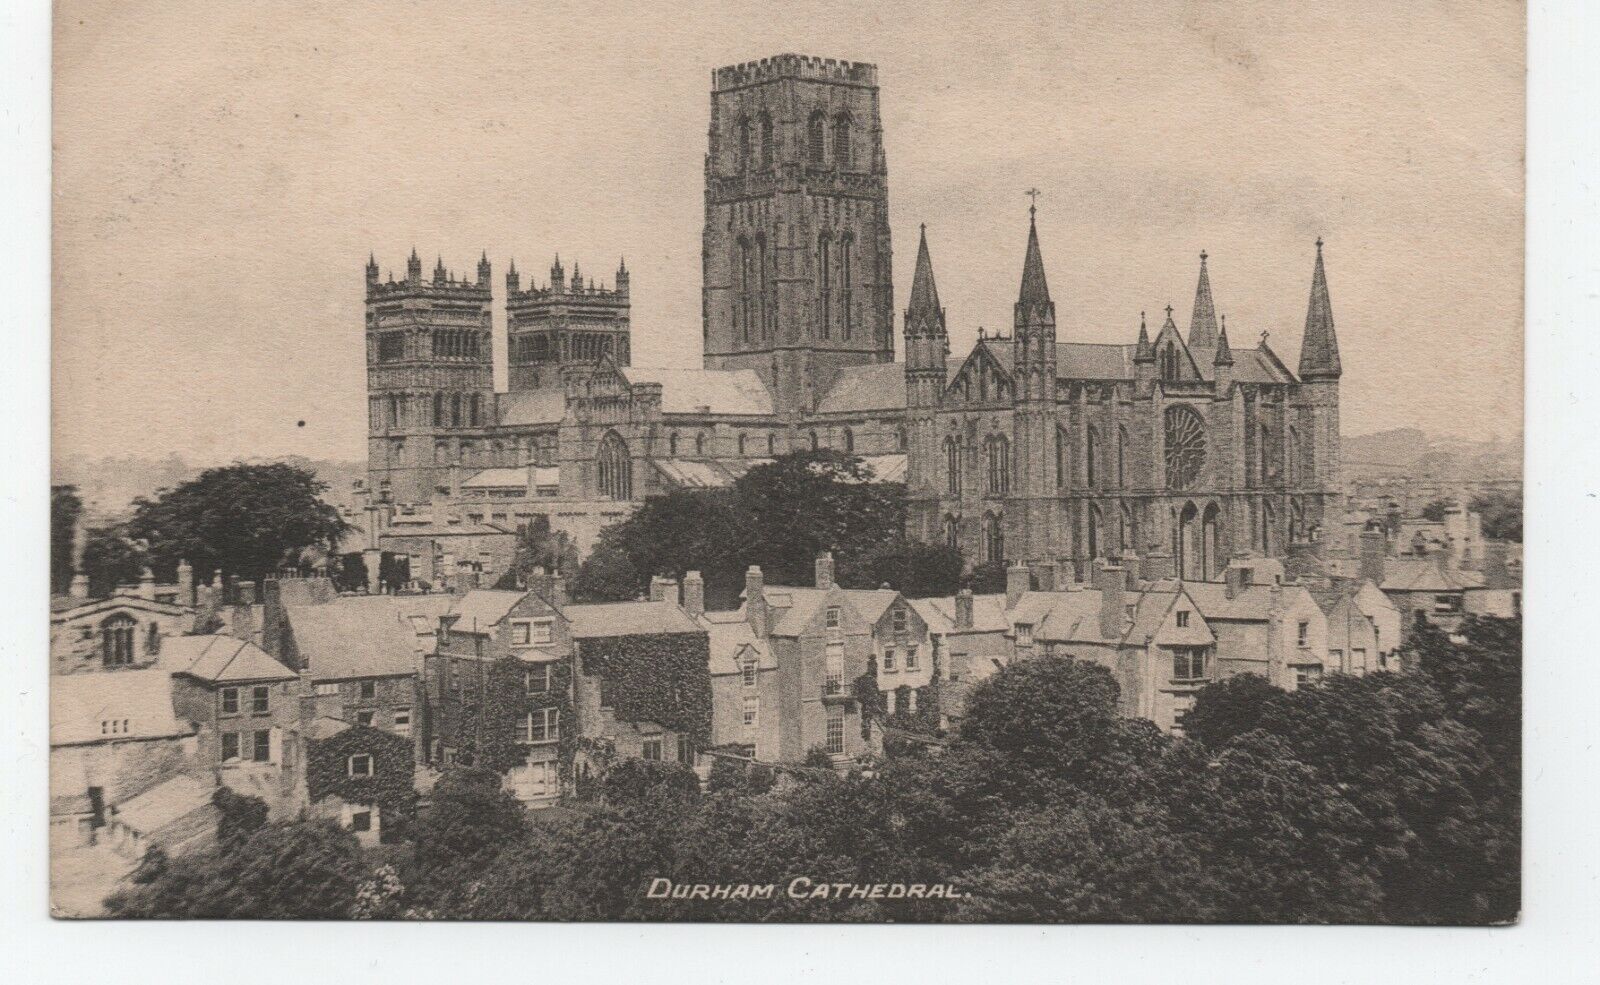 House Clearance - Durham Cathedral, County Durham